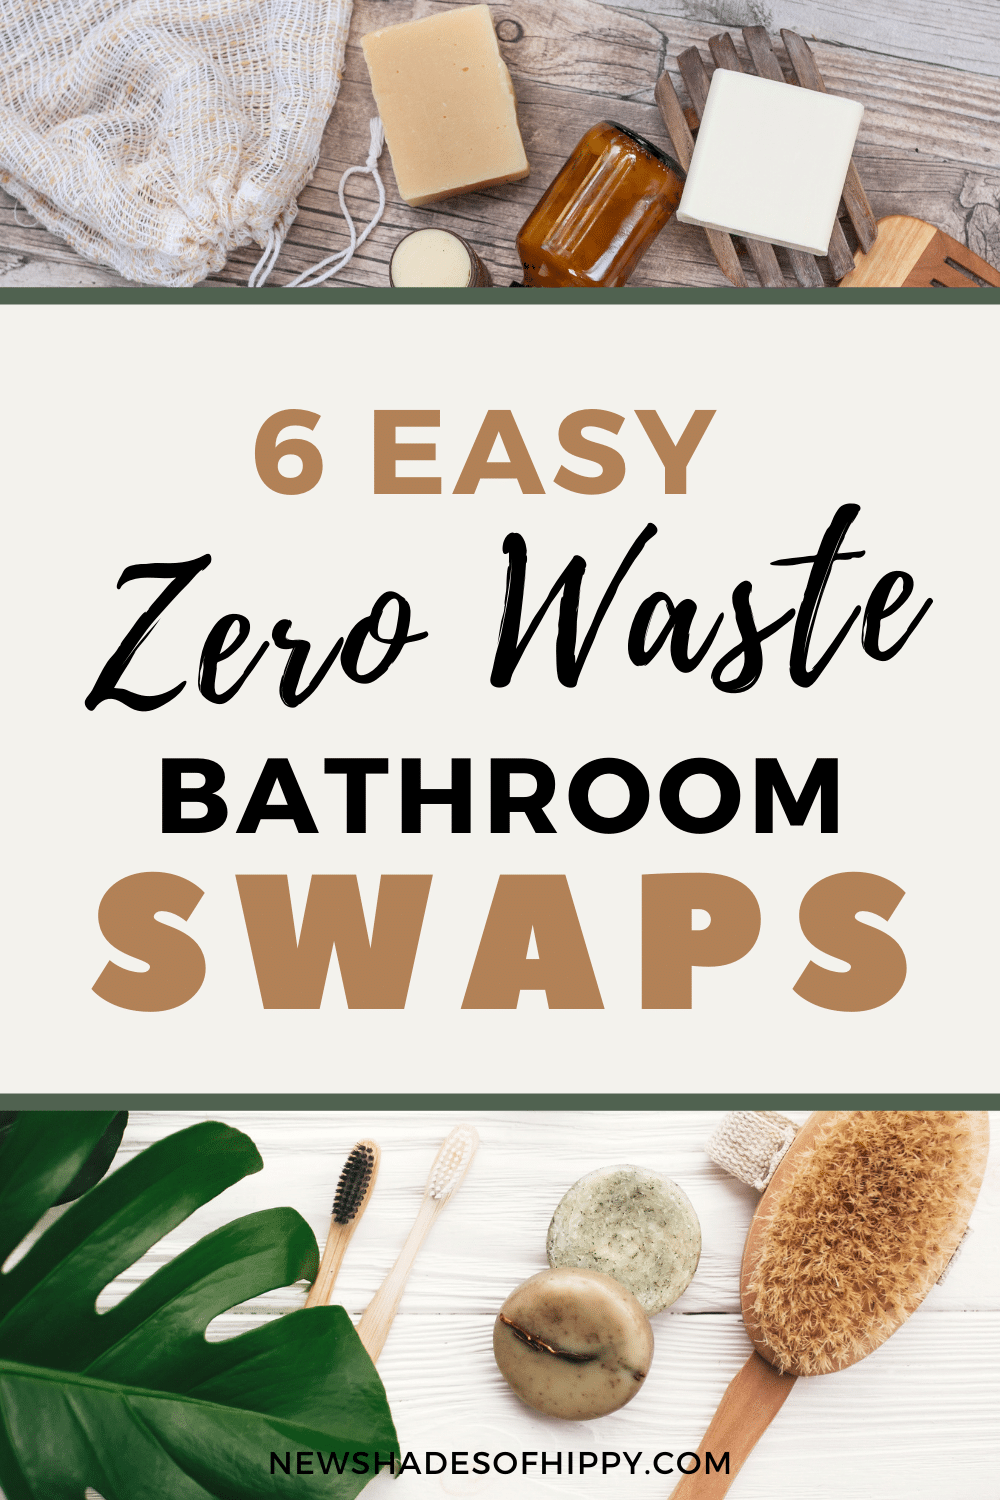 Various wooden zero waste products in background with overlay text: 6 easy zero waste bathroom swaps